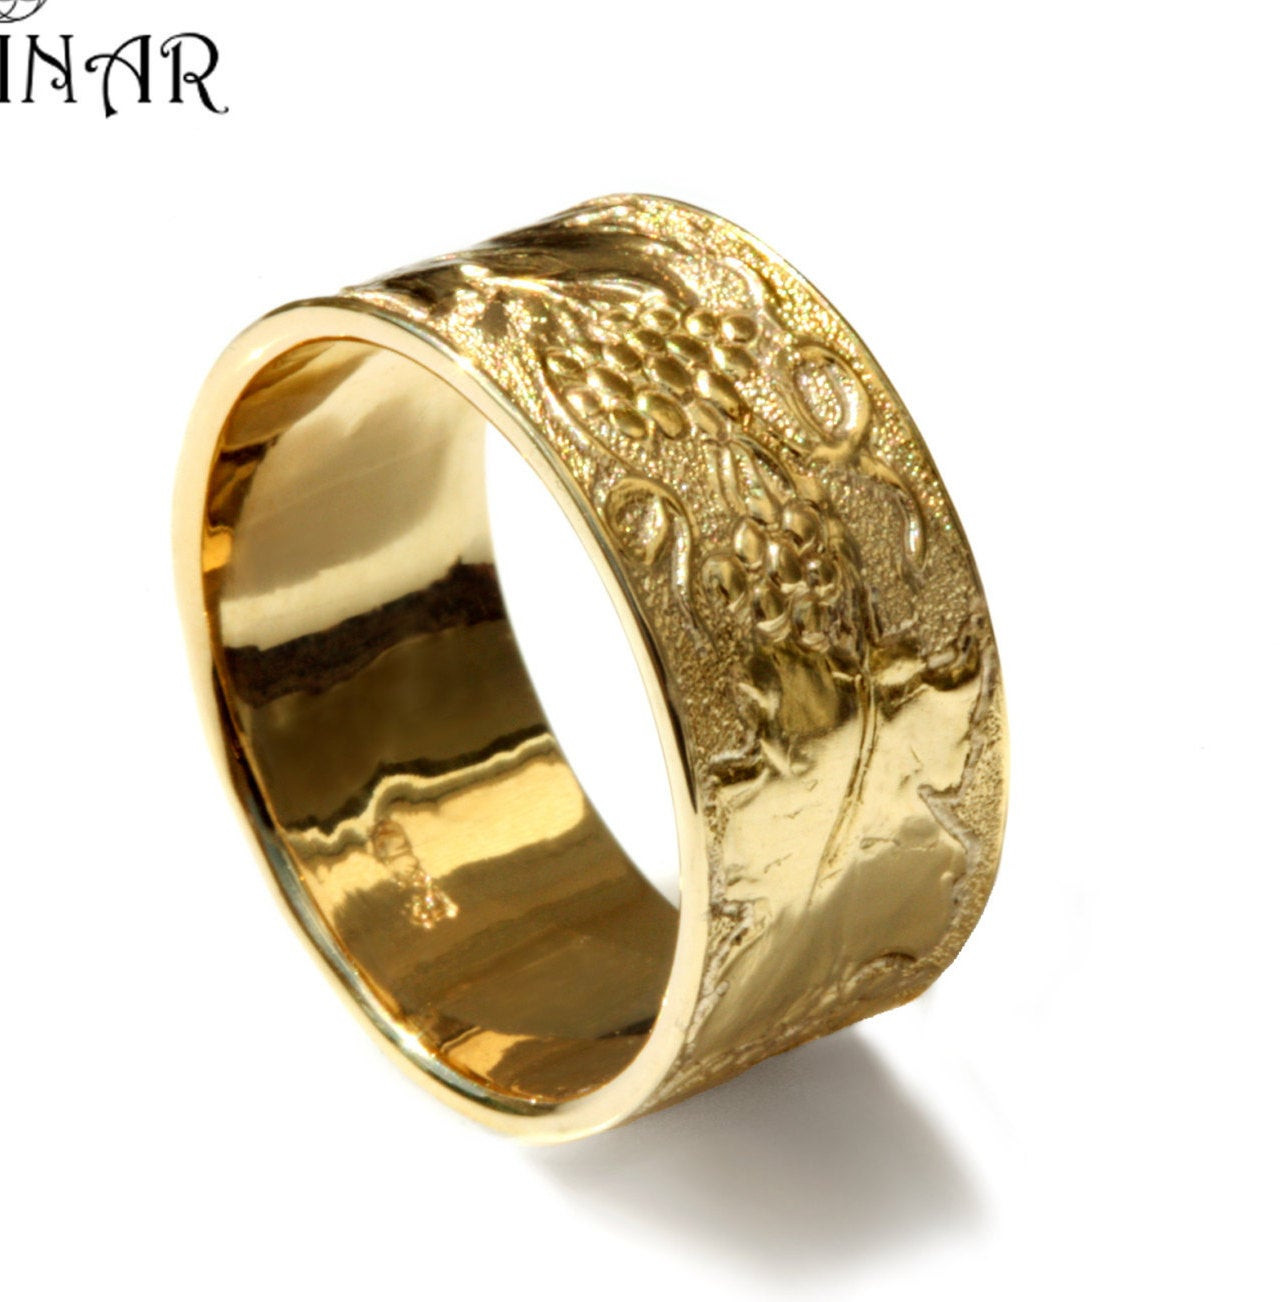 Wide Wedding Bands For Women
 14k yellow Gold leaf wedding band women wide wedding ring